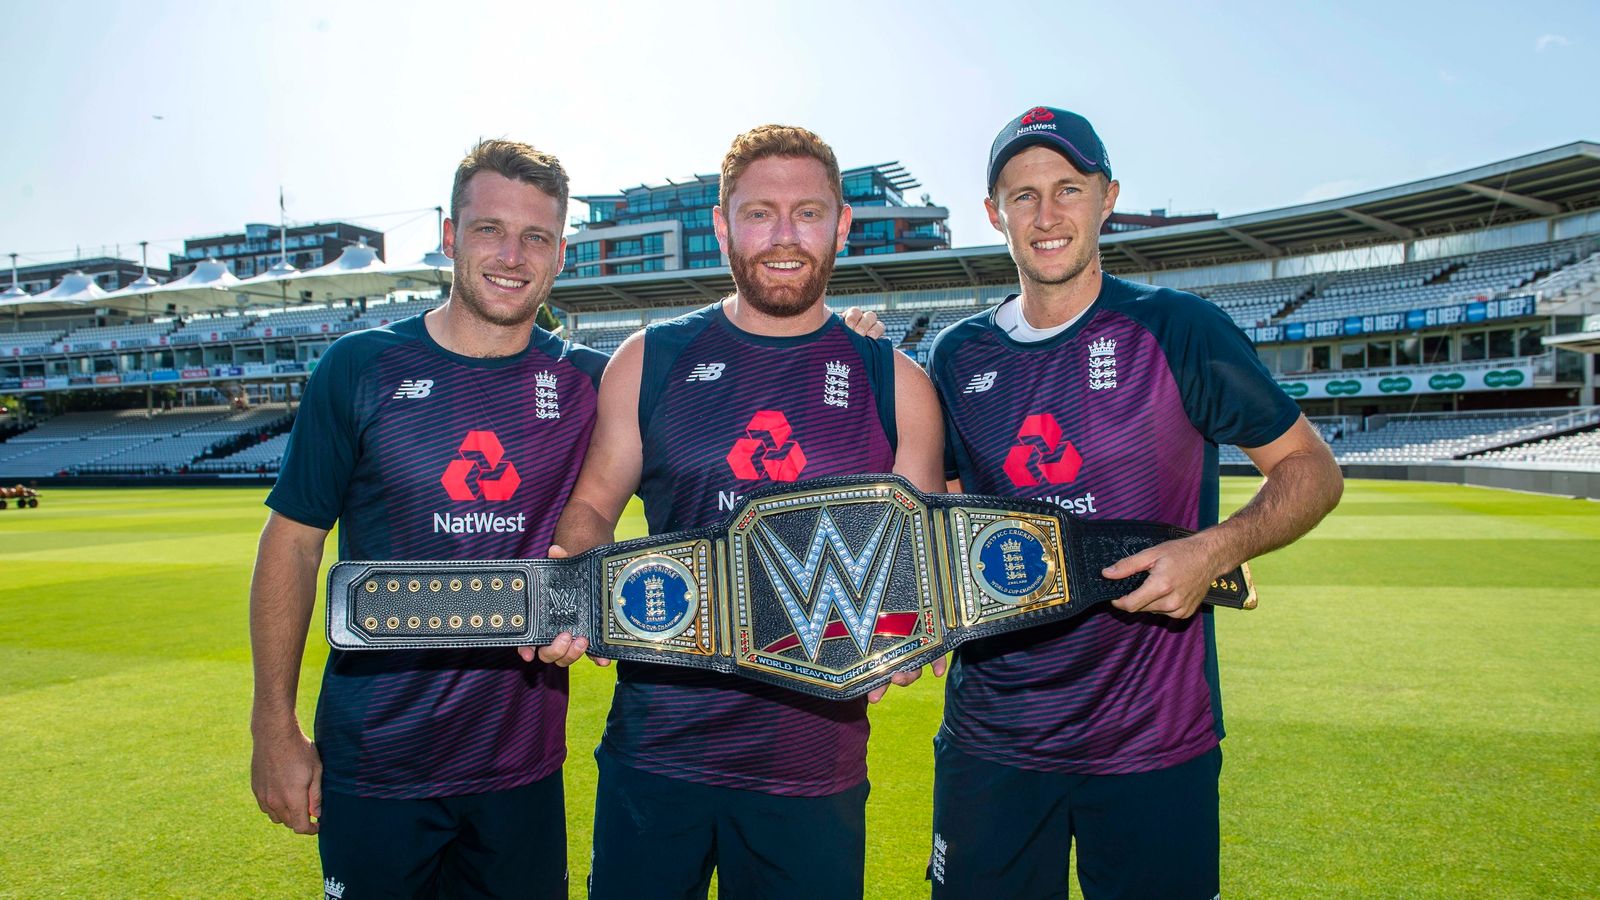 England cricketers get WWE title belt to mark World Cup ...